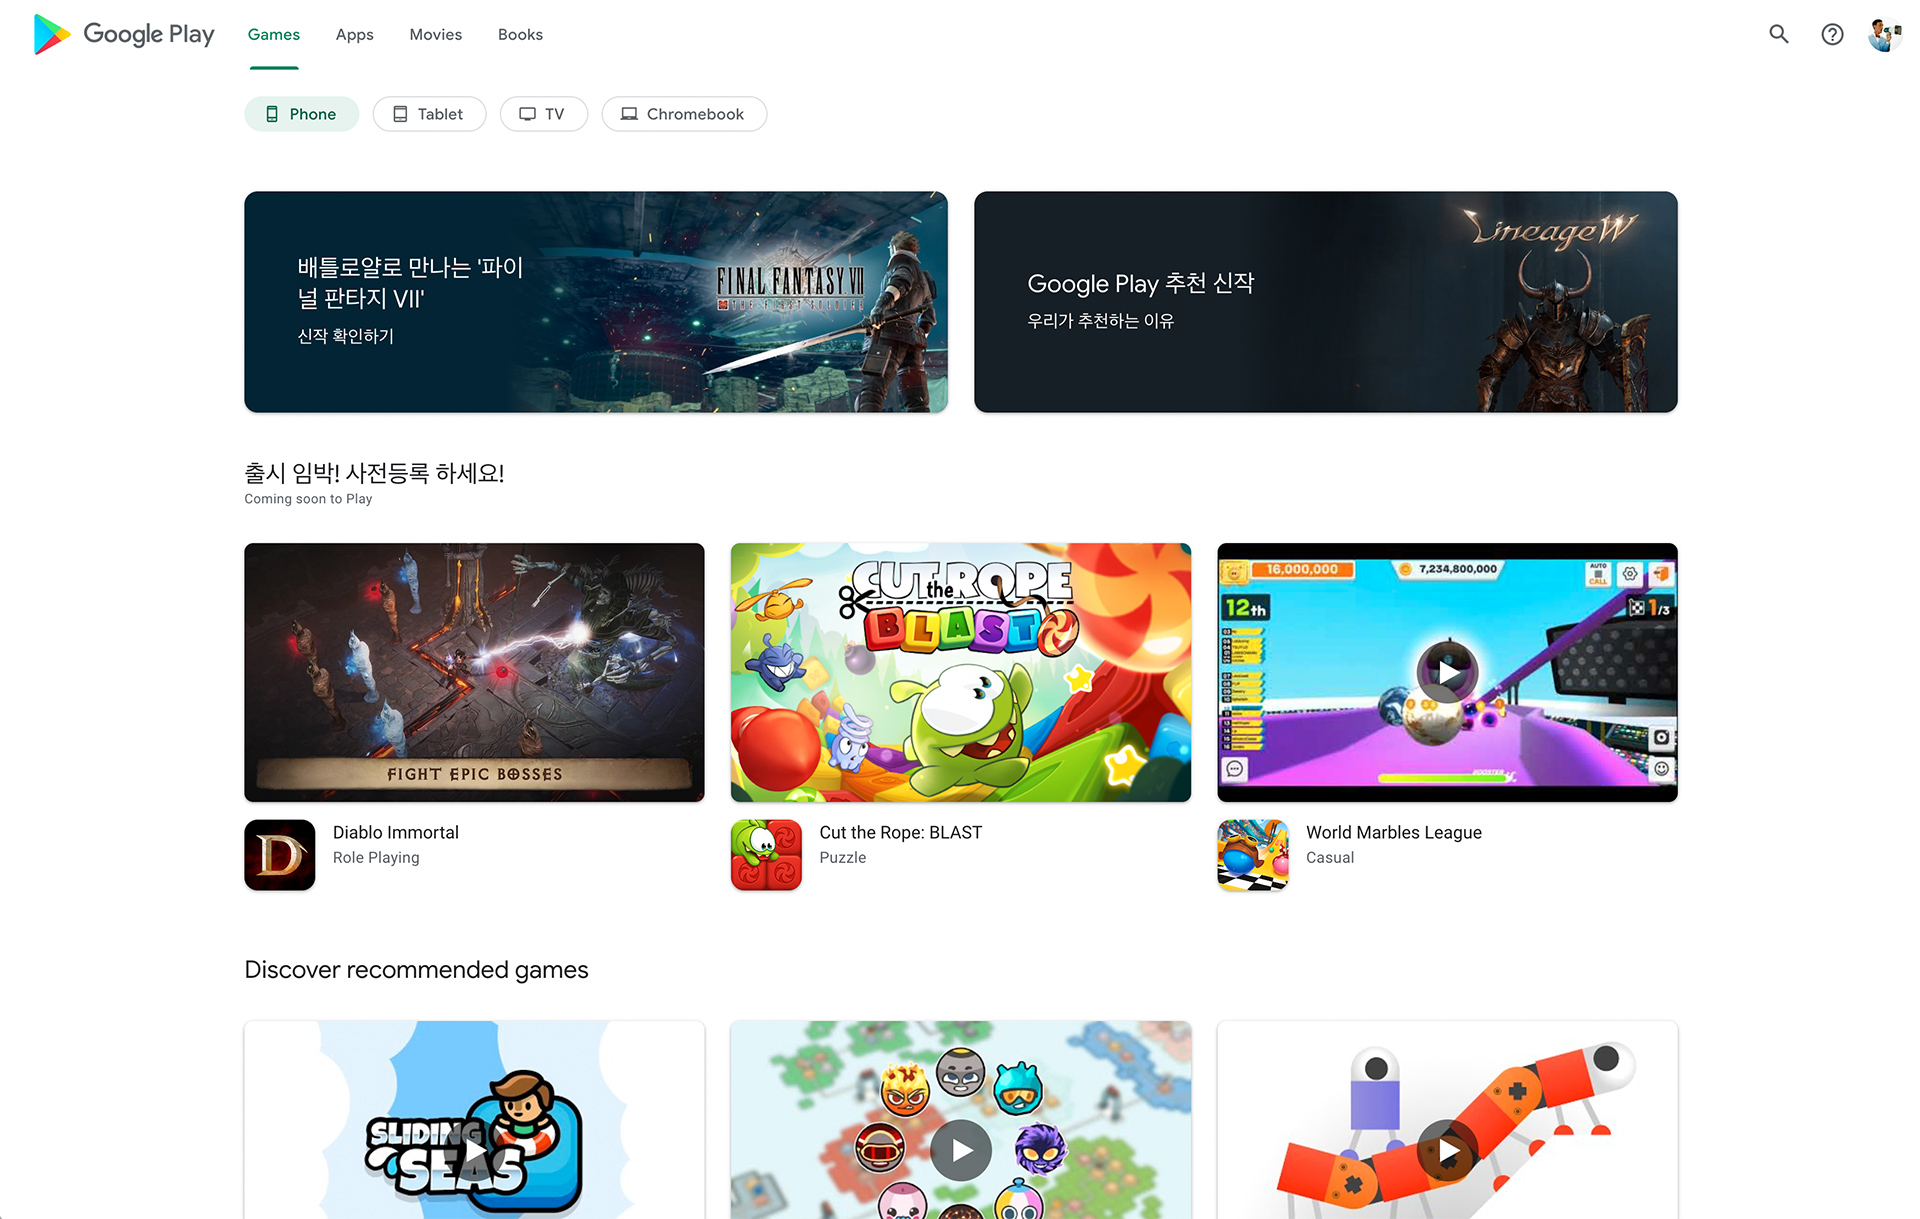 Private: The Google Play Store website might get a long-awaited redesign